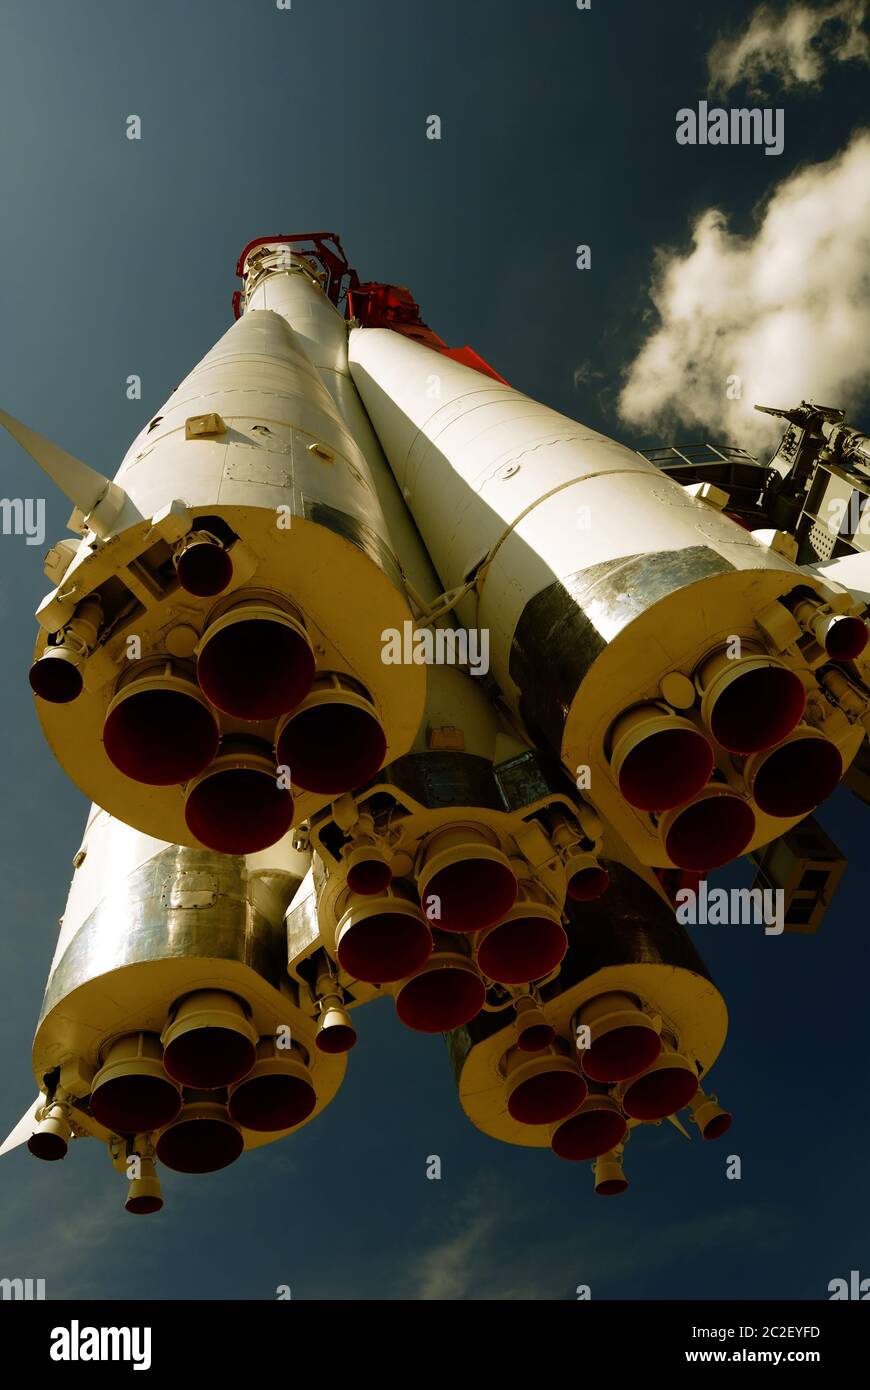 space rocket Vostok-1 with bicolor filter Stock Photo